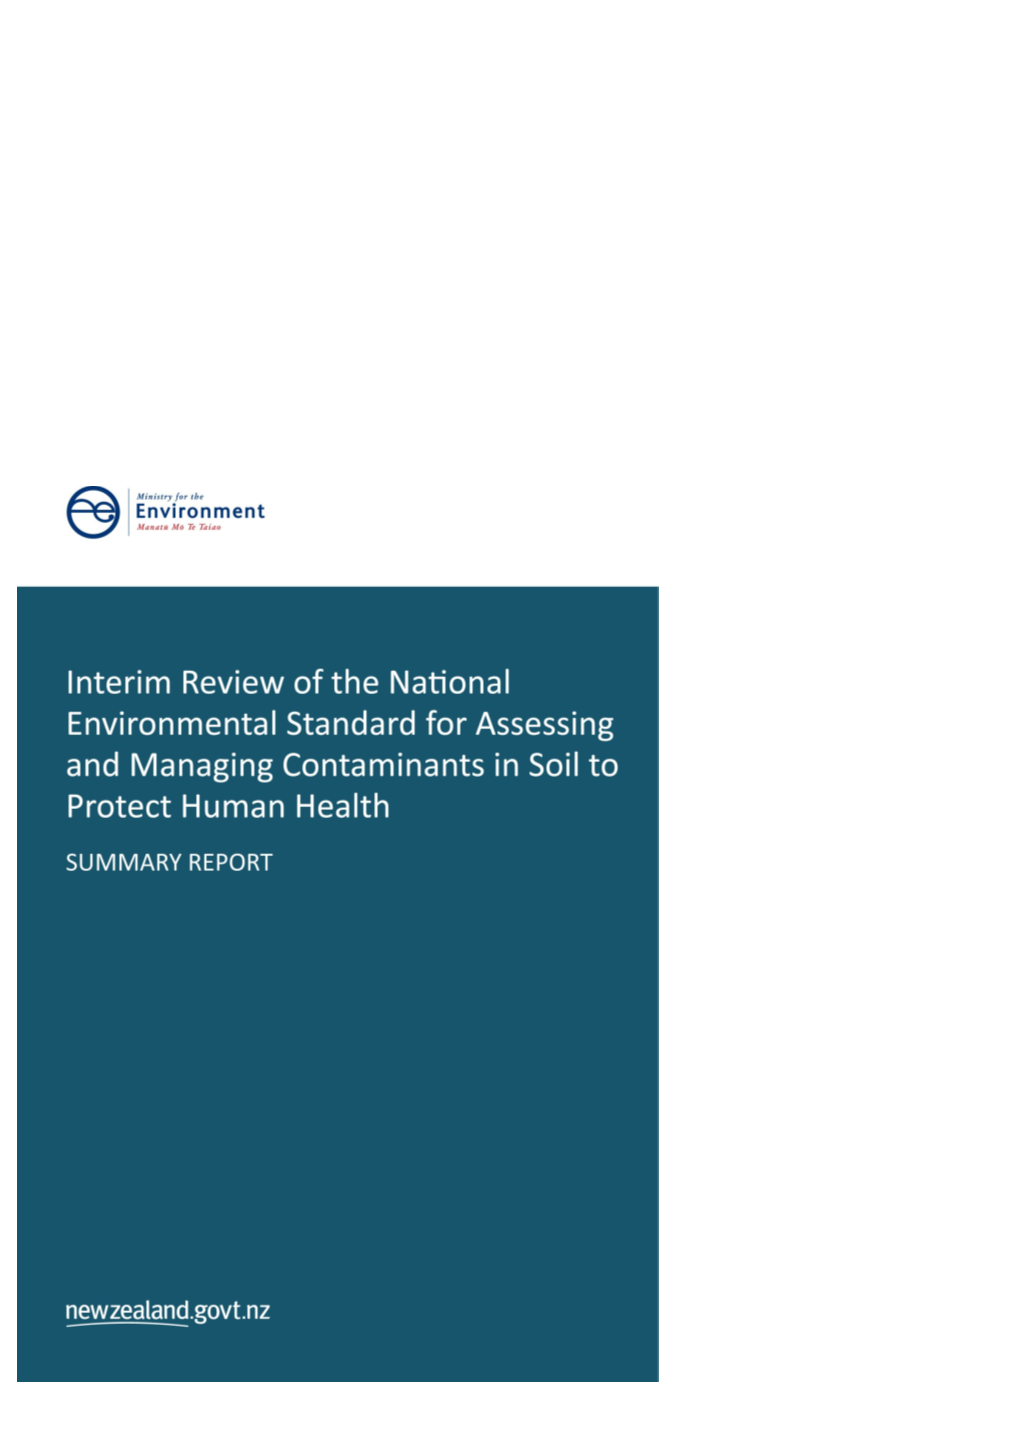 Interim Review of the National Environmental Standard for Assessing and Managing Contaminants